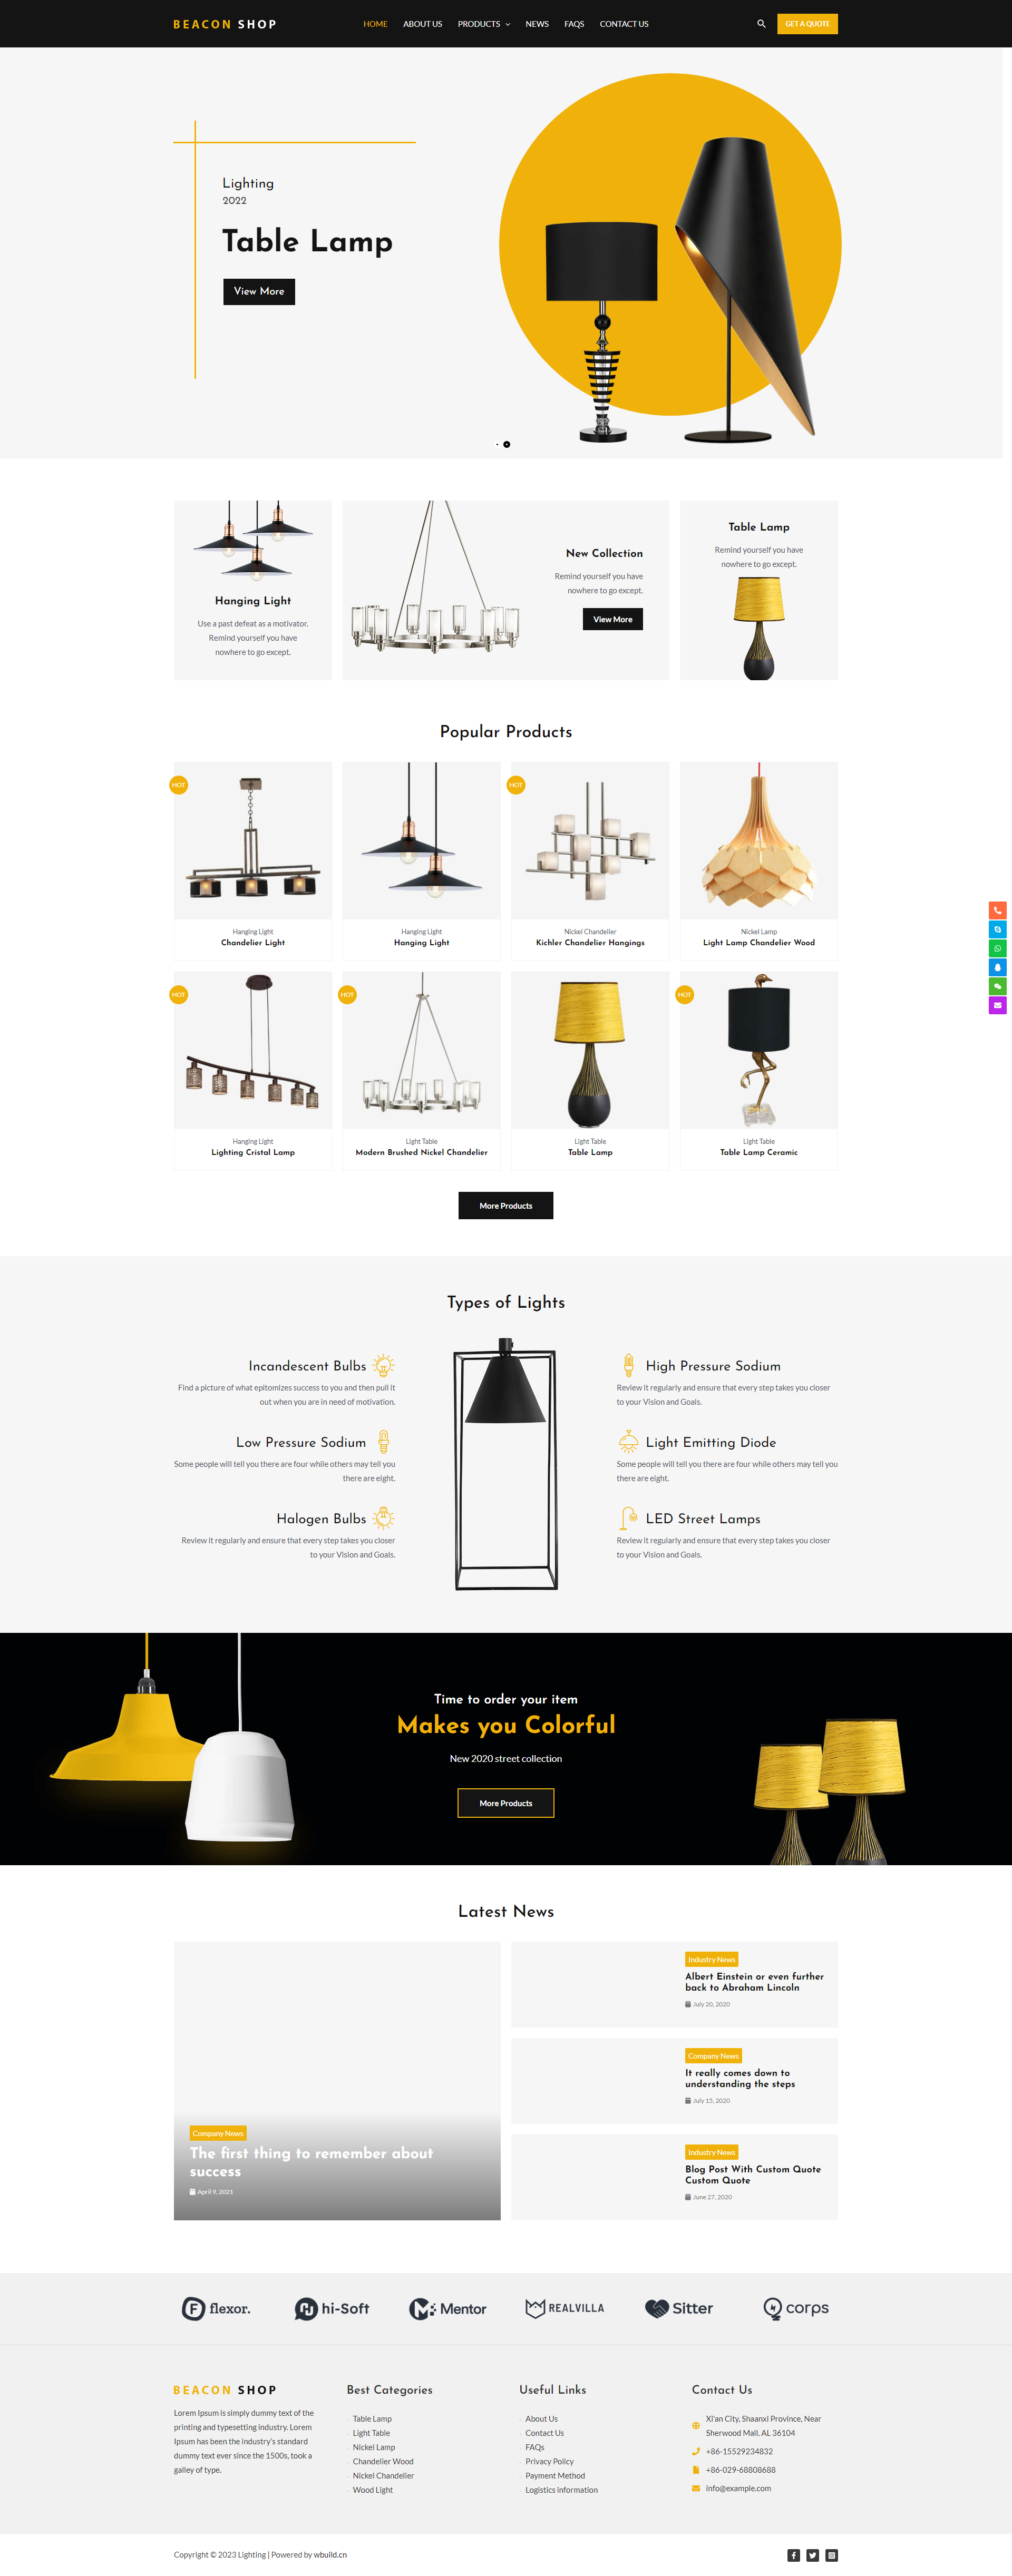 Lamps chandeliers table lamps